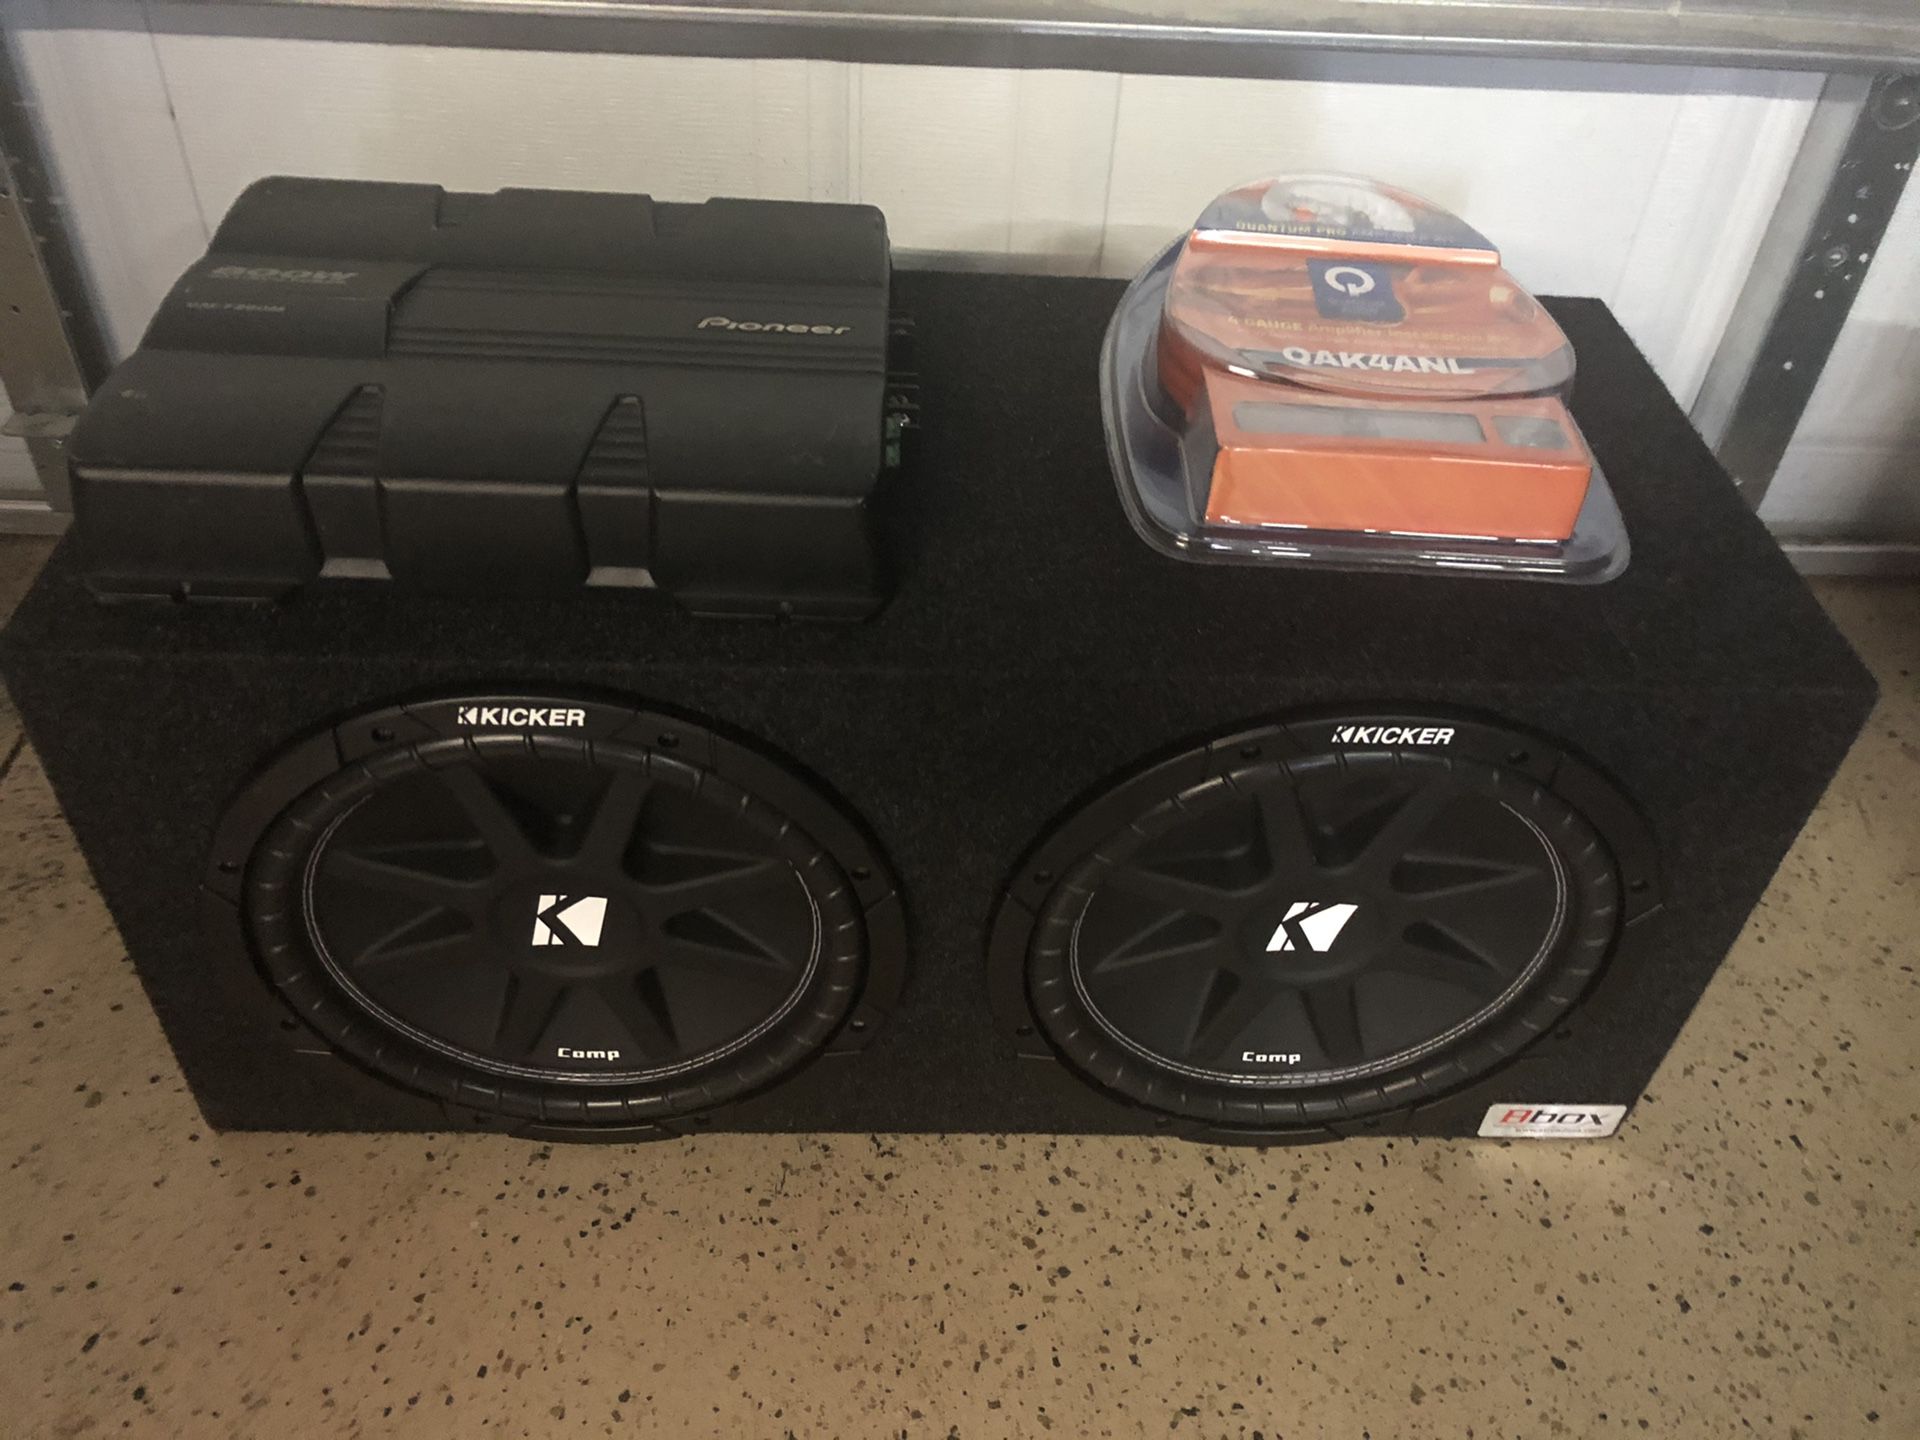 2 12 Kicker comps in box with pioneer amp and wires